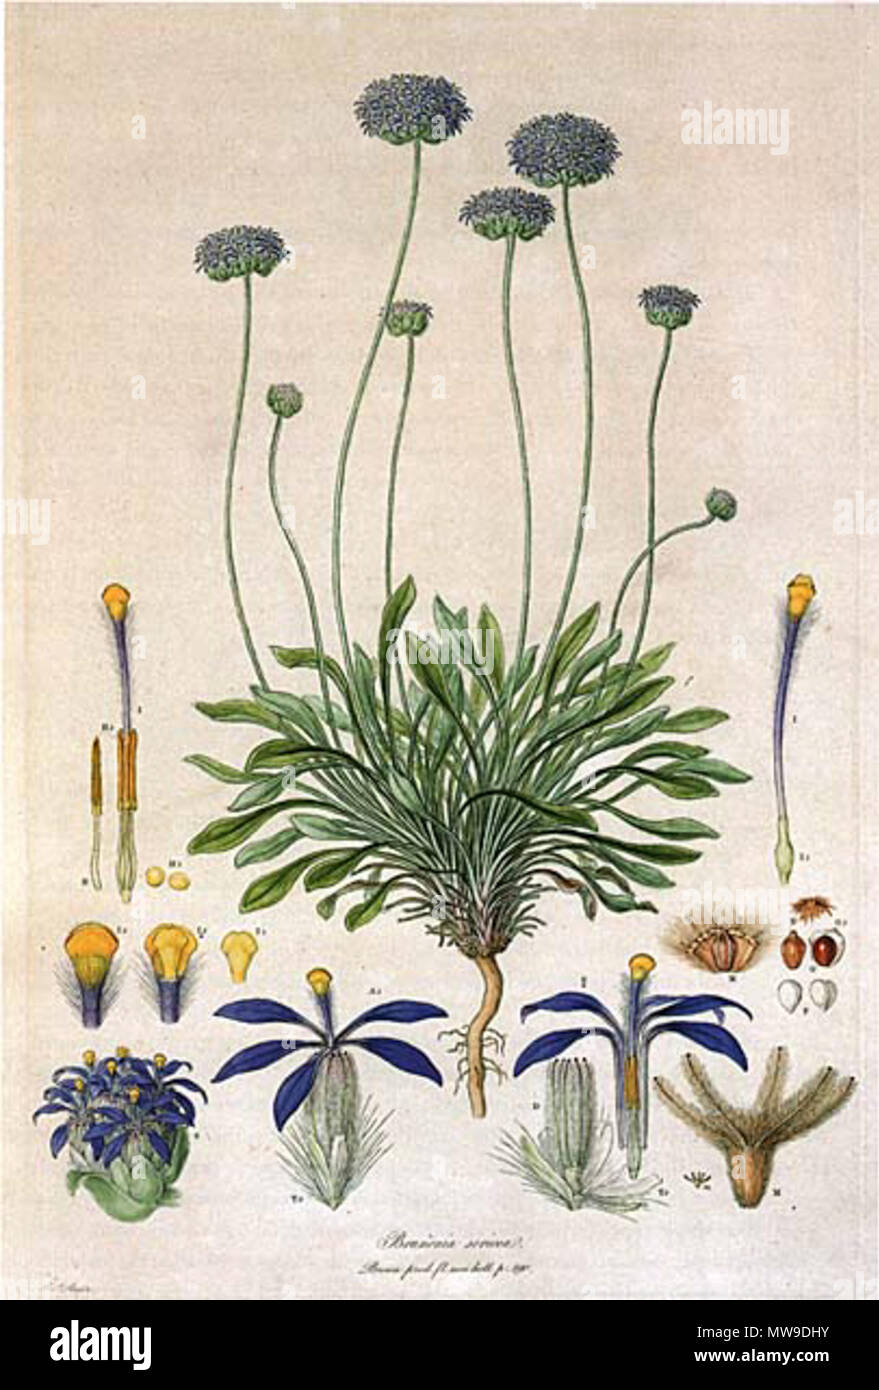 . This is a scan of Plate 10 from Ferdinand Bauer's Illustrationes Florae Novae Hollandiae. The plant featured is Brunonia australis (Blue Pincushion), then known as Brunonia sericea. early 19th century. Ferdinand Bauer (1760–1826) 102 Brunonia australis-Bauer Stock Photo